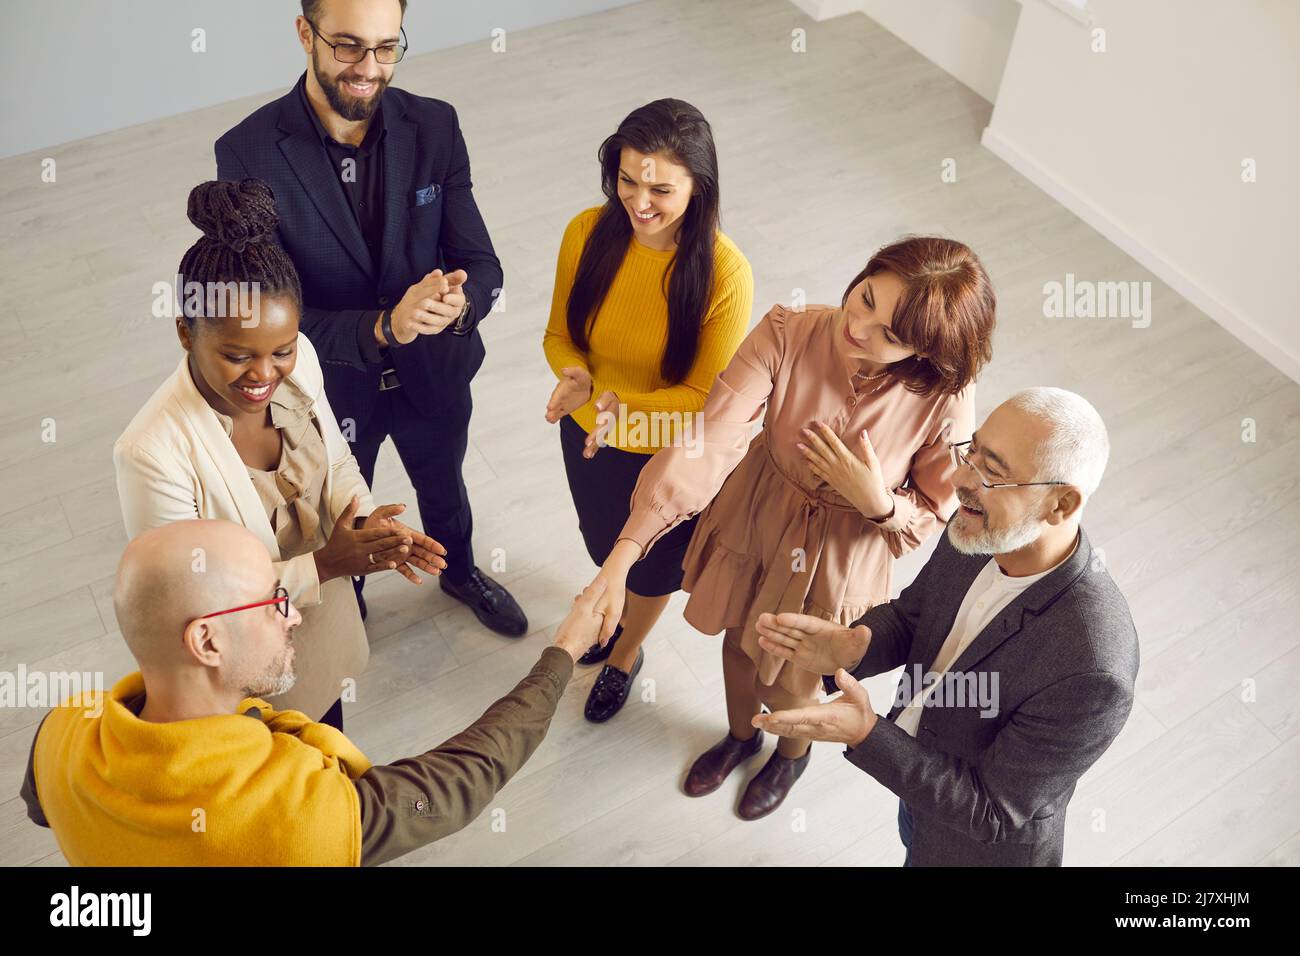 Smiling businesspeople shake hands make agreement Stock Photo